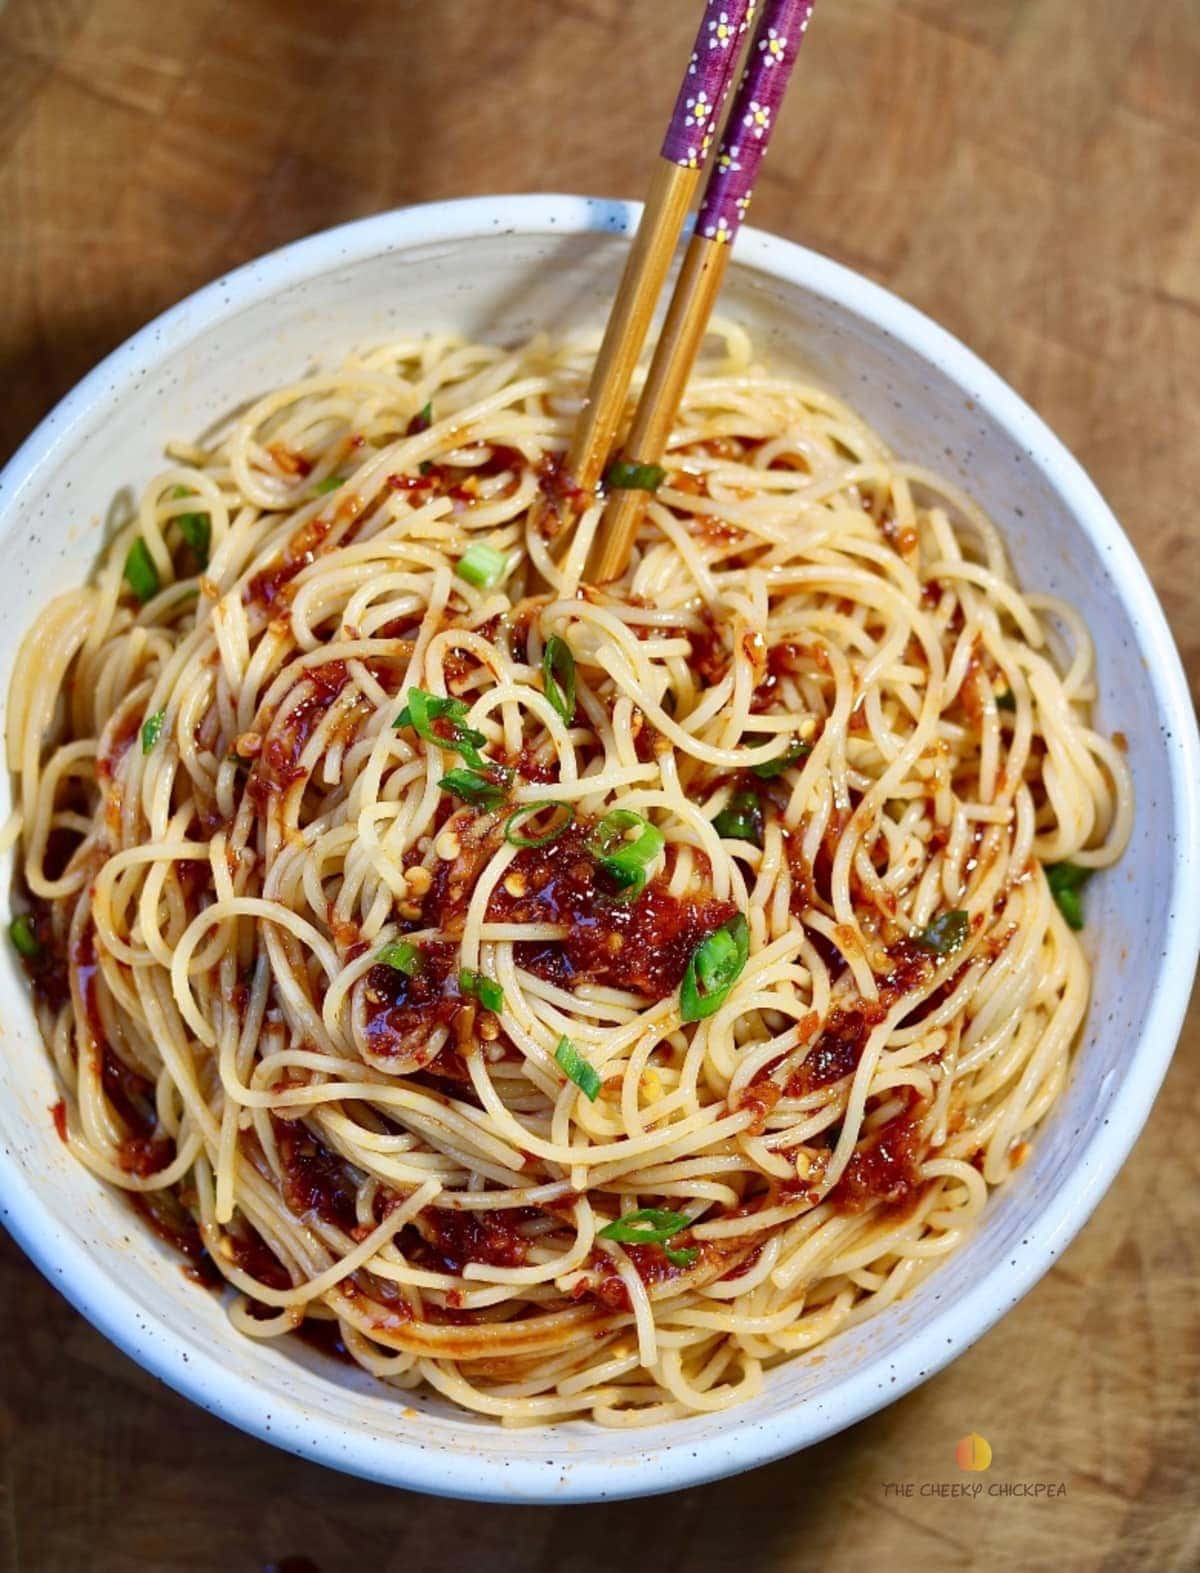 Sweet & Spicy Garlic Noodles - The Cheeky Chickpea